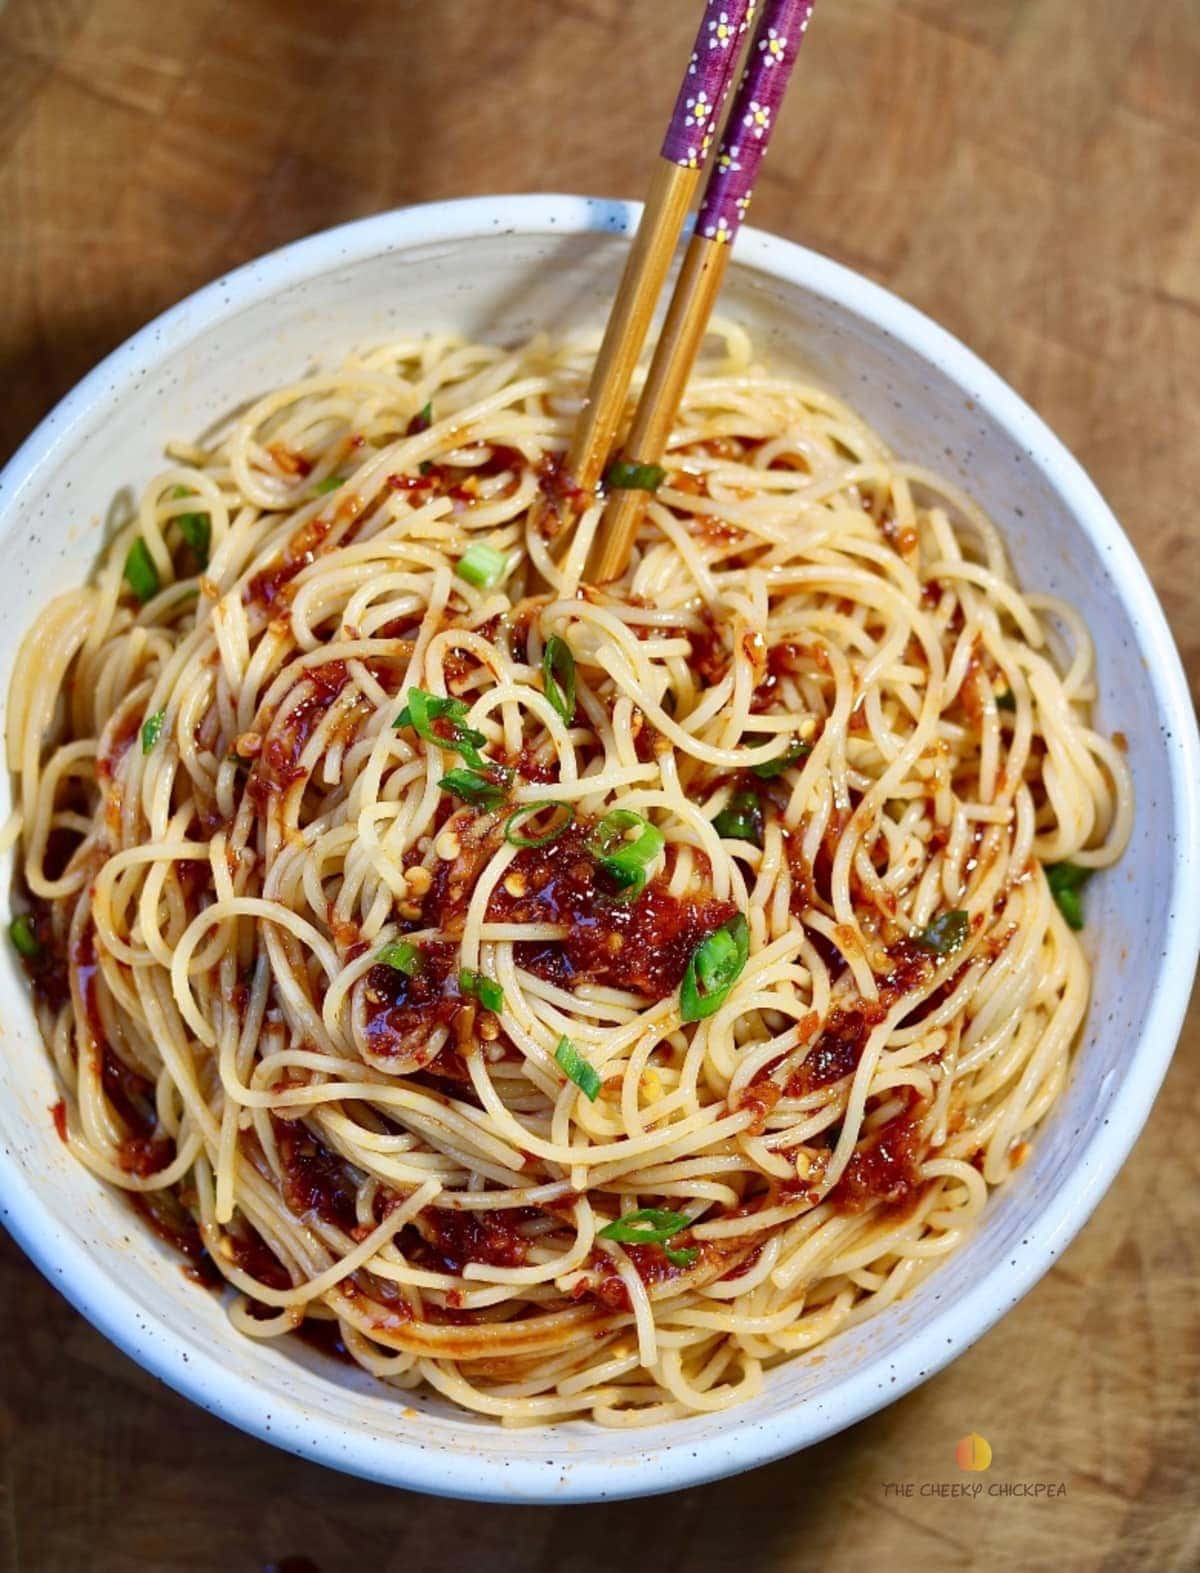 Sweet & Spicy Garlic Noodles - The Cheeky Chickpea